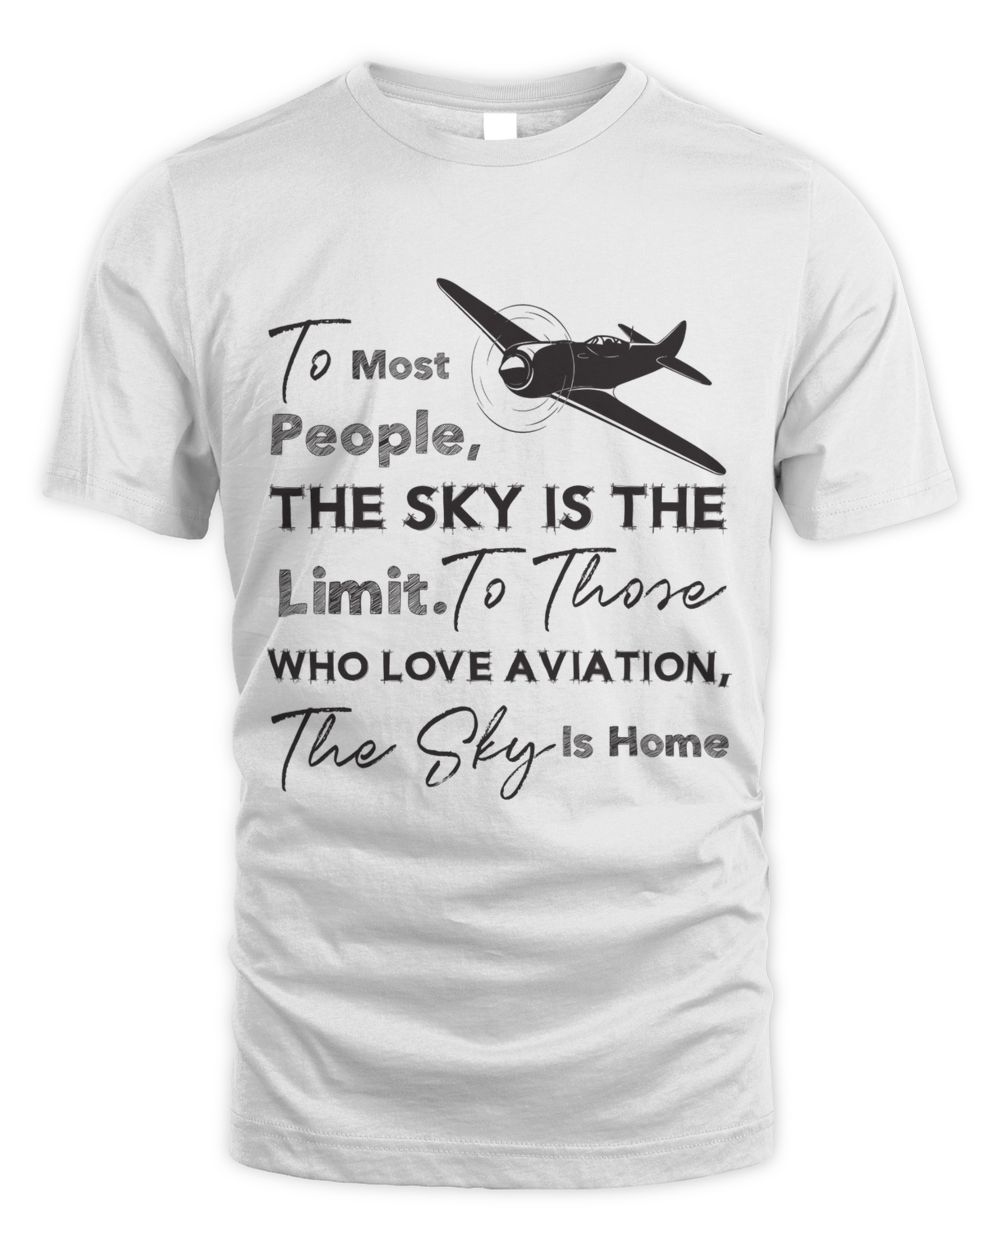 To most people, the sky is the limit. To those who love aviation, the sky is home Unisex Standard T-Shirt white 